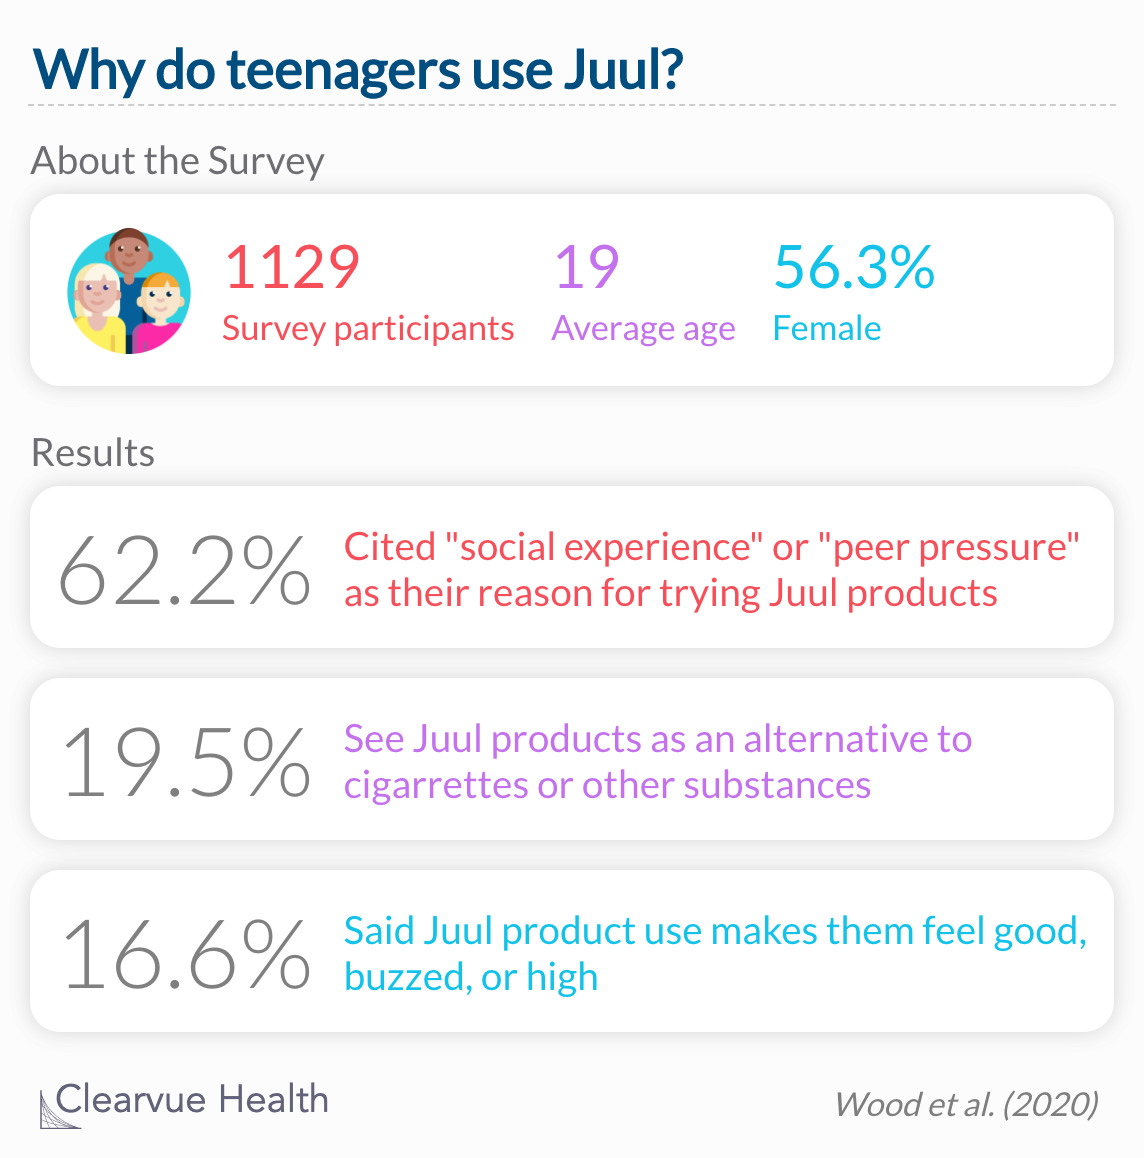 Data found that the majority of young people try Juul as part of a social experience. 